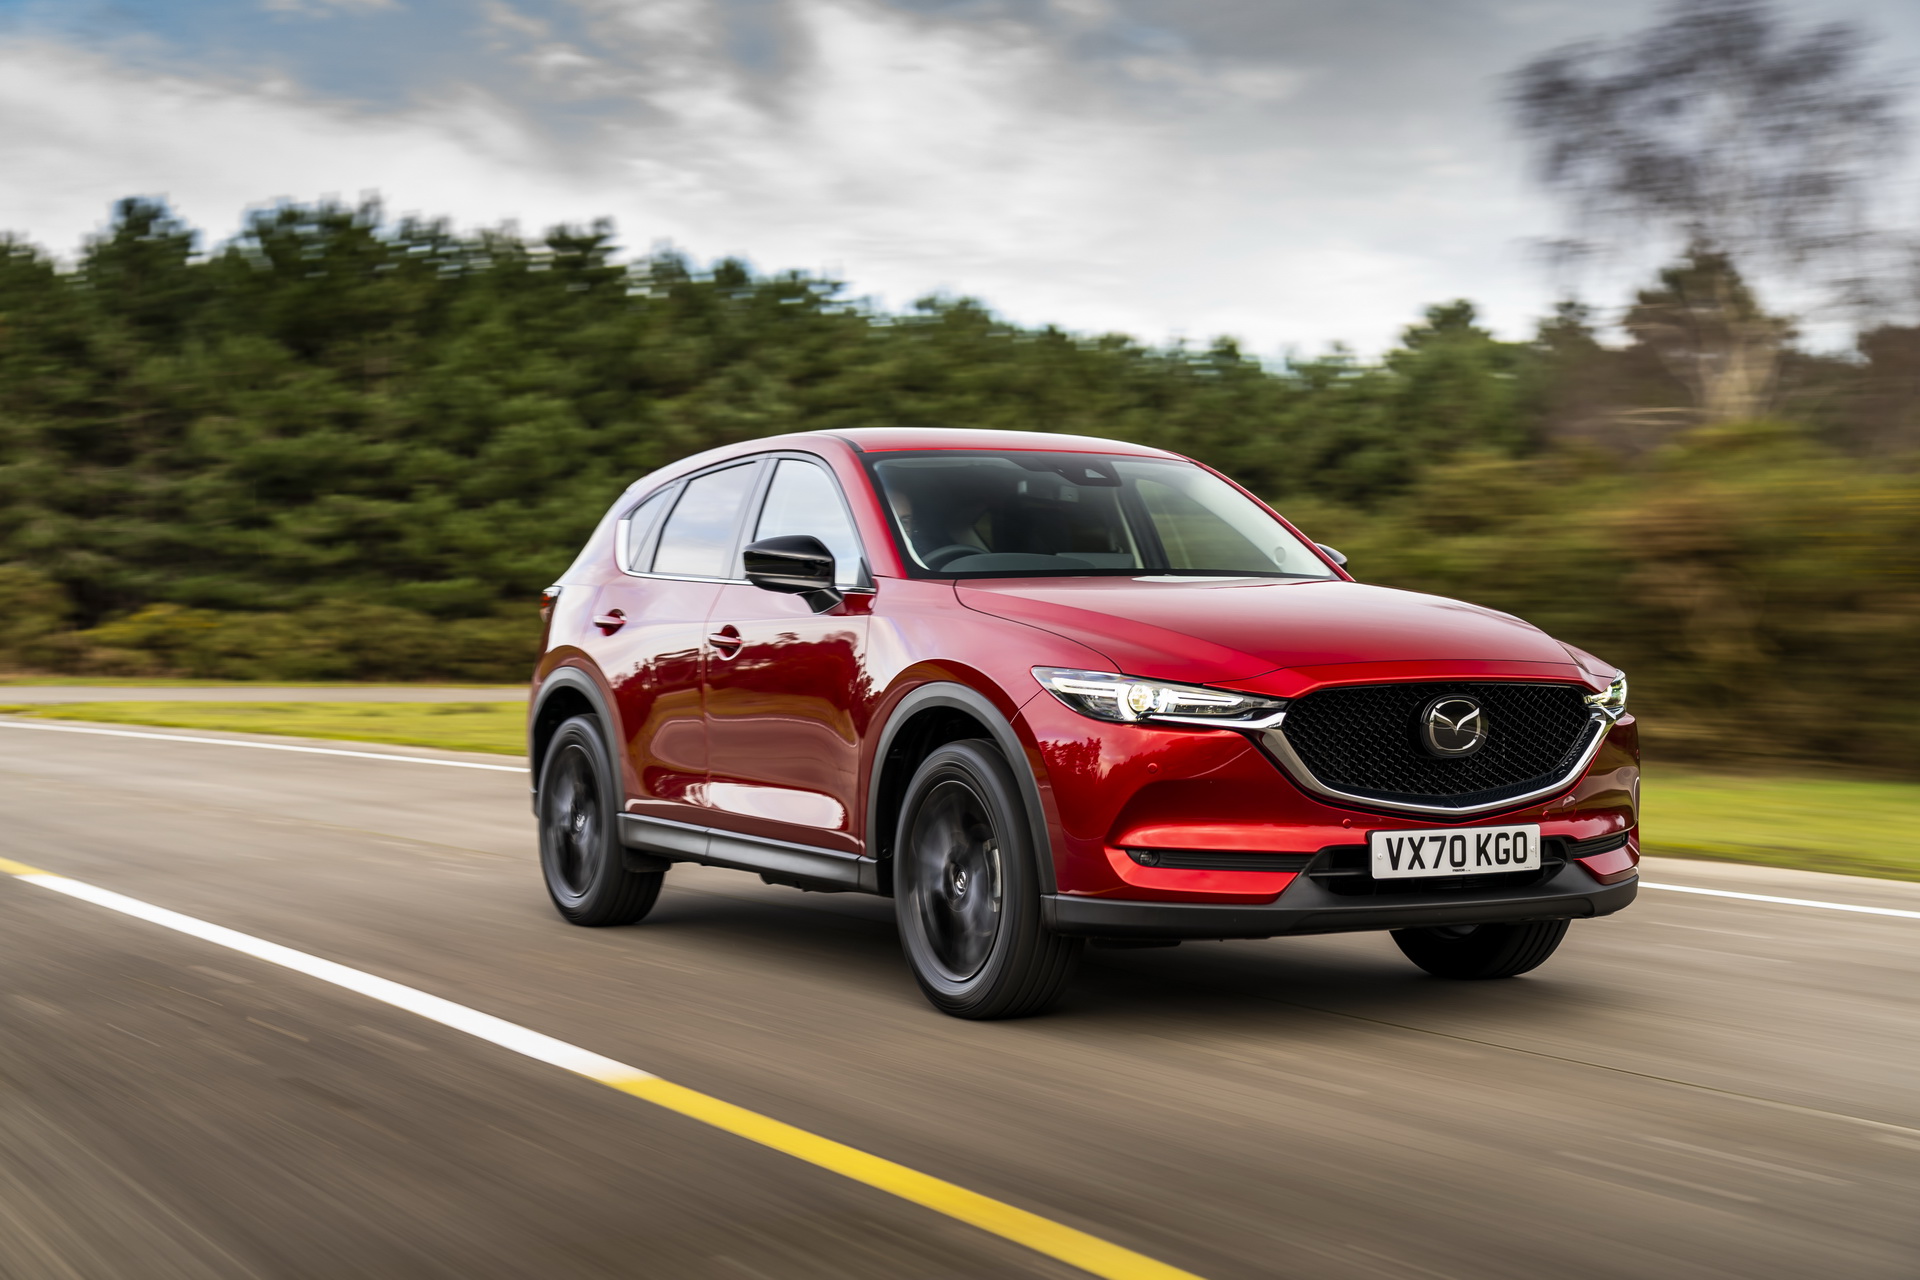 2021 Mazda CX-5 Launched In The UK With New Engine And Kuro Special ...